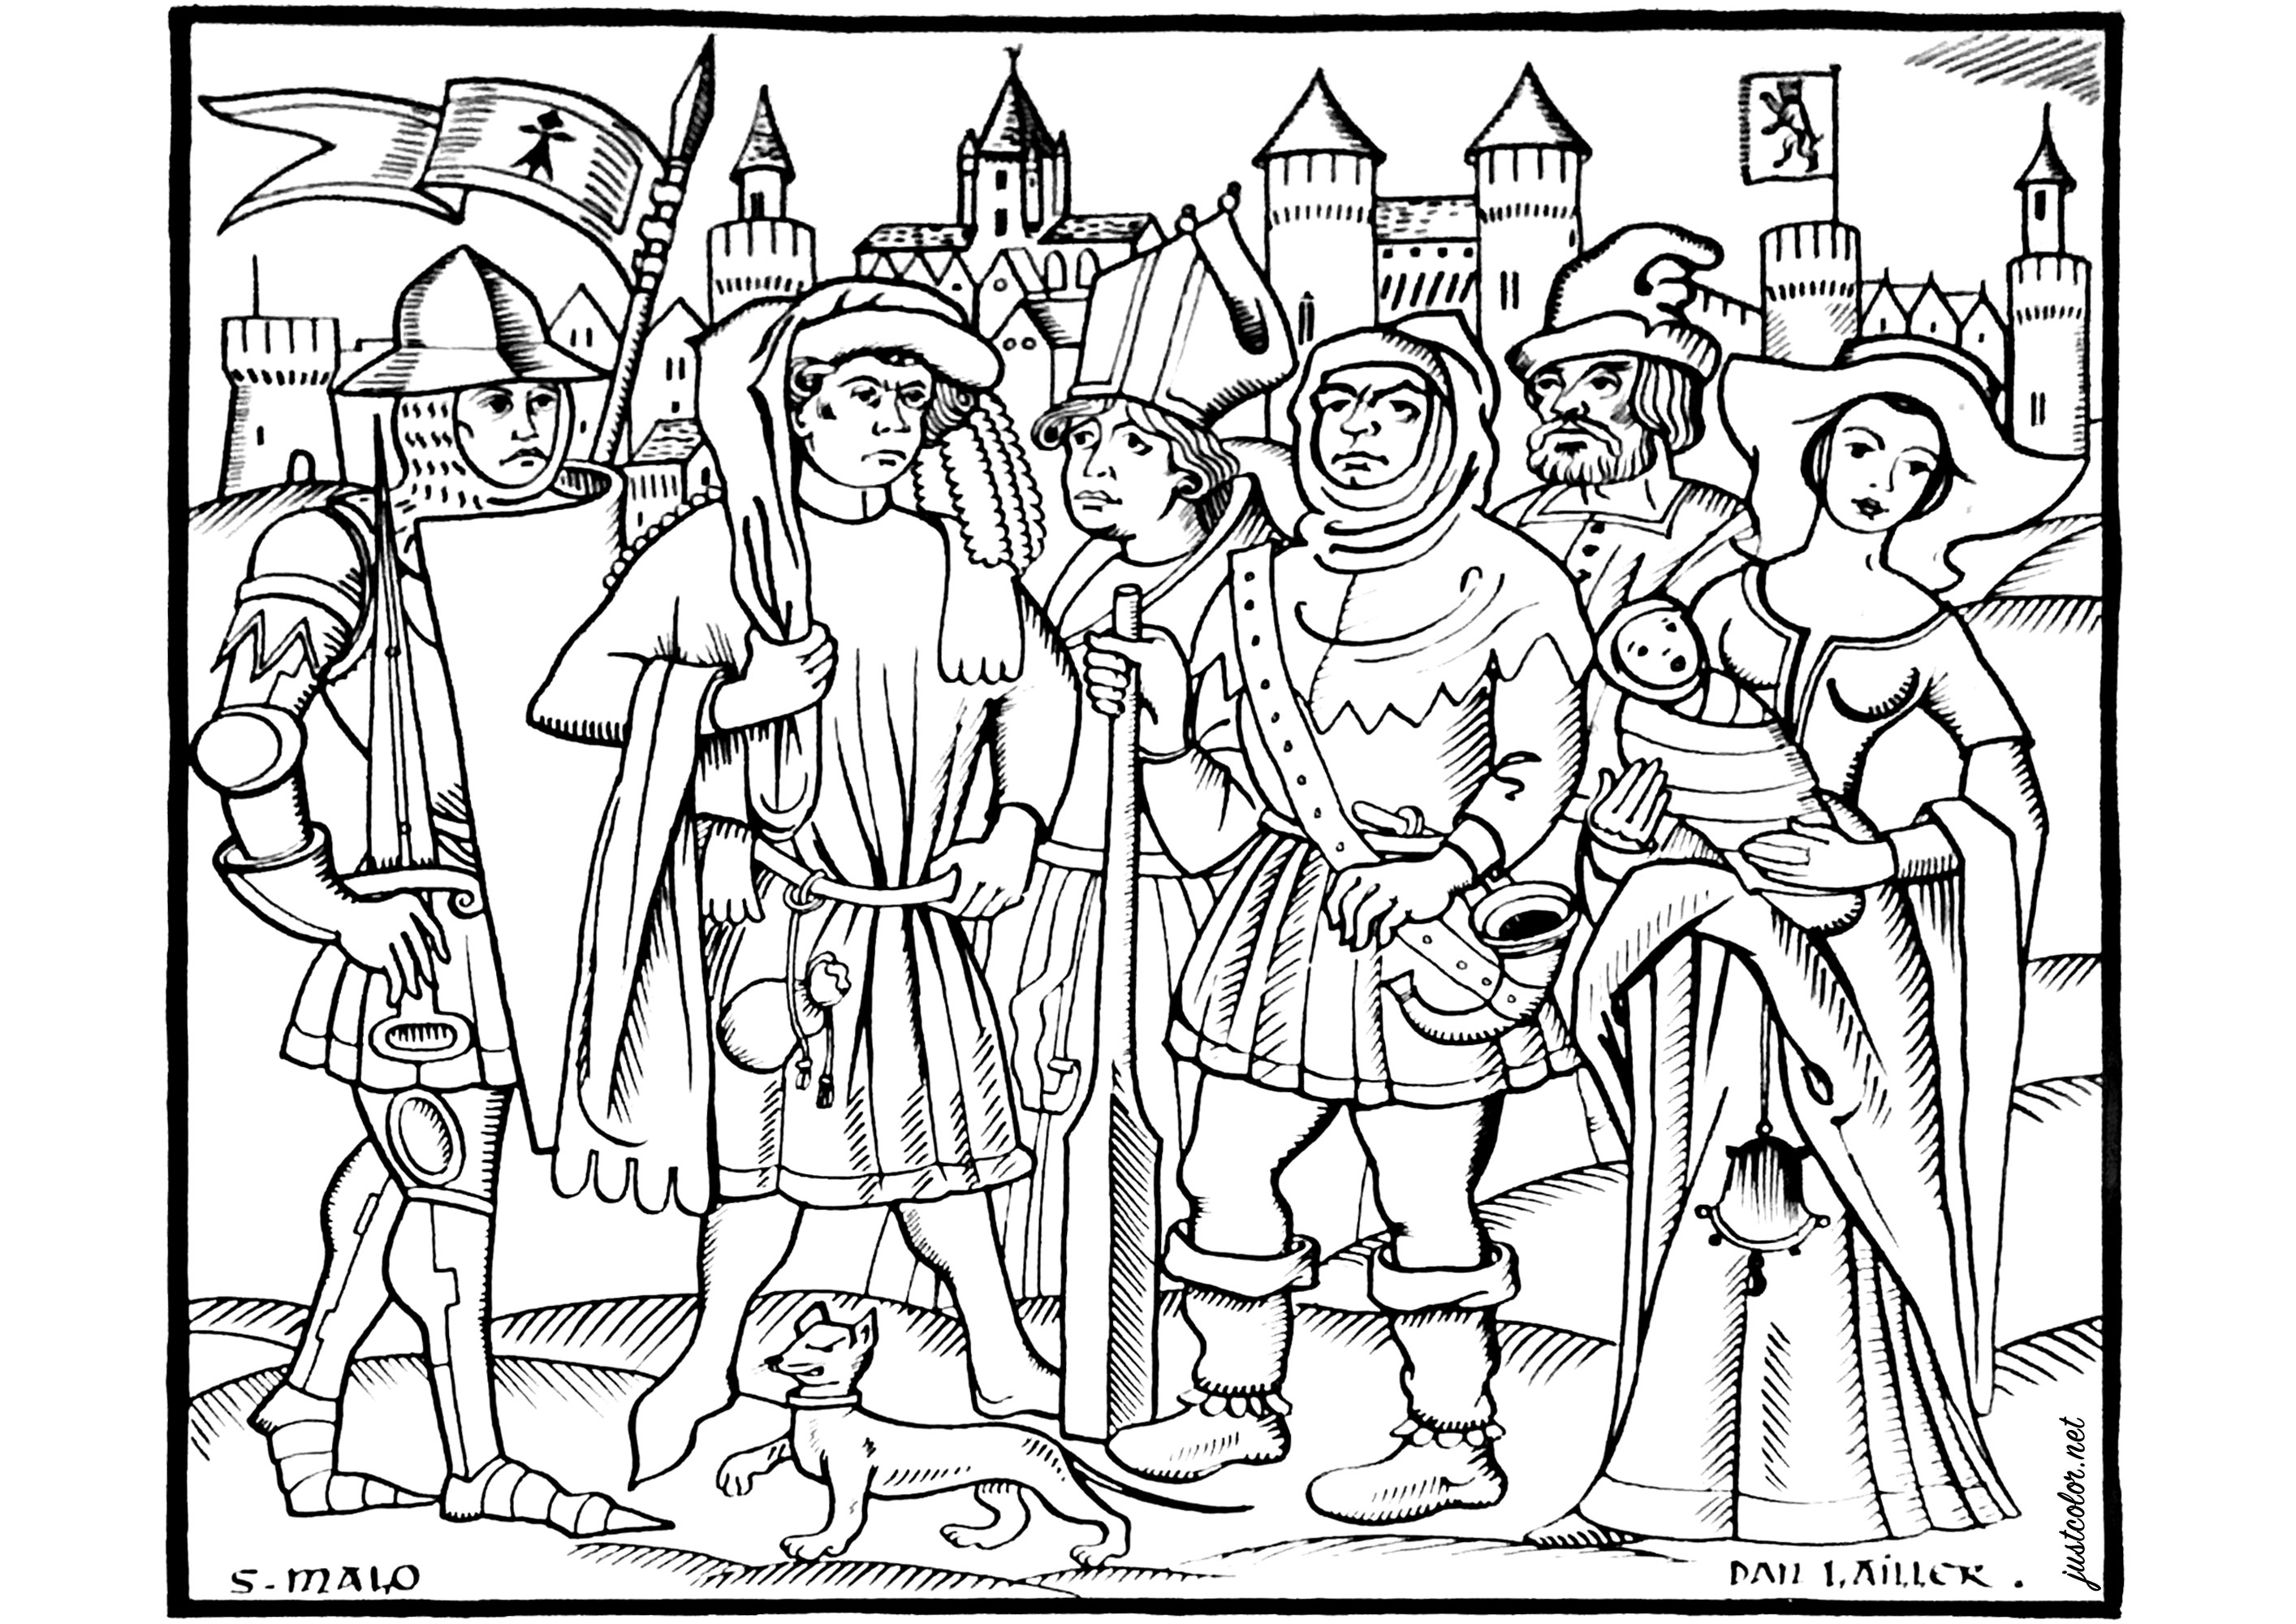 Coloring page created from an illustration representing a scene from the Middle Ages in Saint Malo (France).  Original illustration by Dan Lailler (1919, 2001)